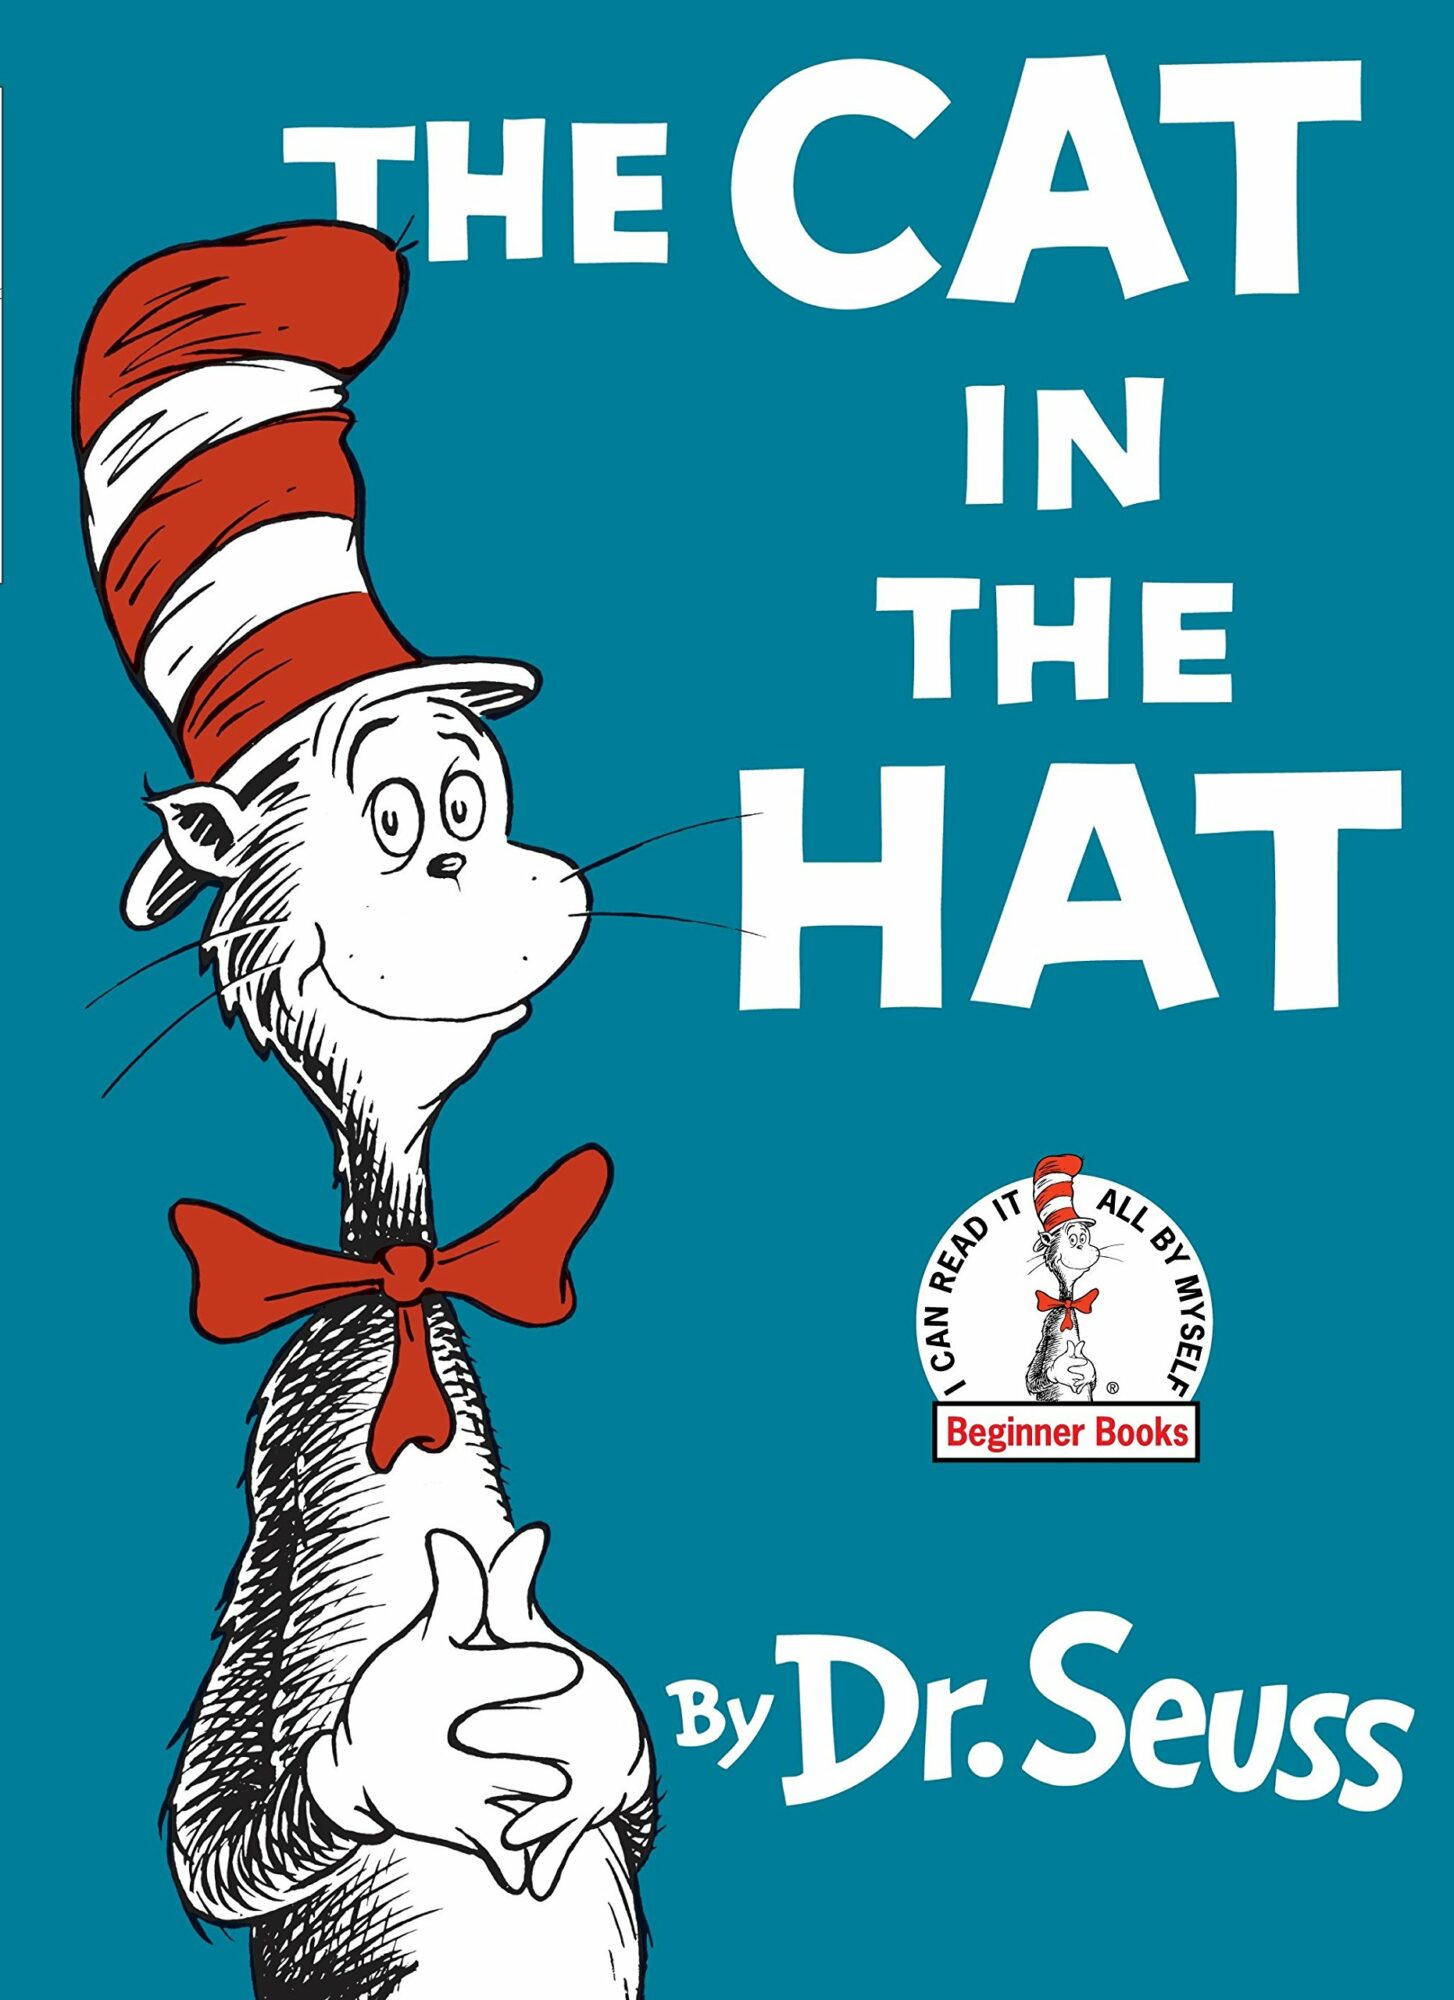 The Cat In The Hat by Dr Seuss: Archetypal Carnivalesque